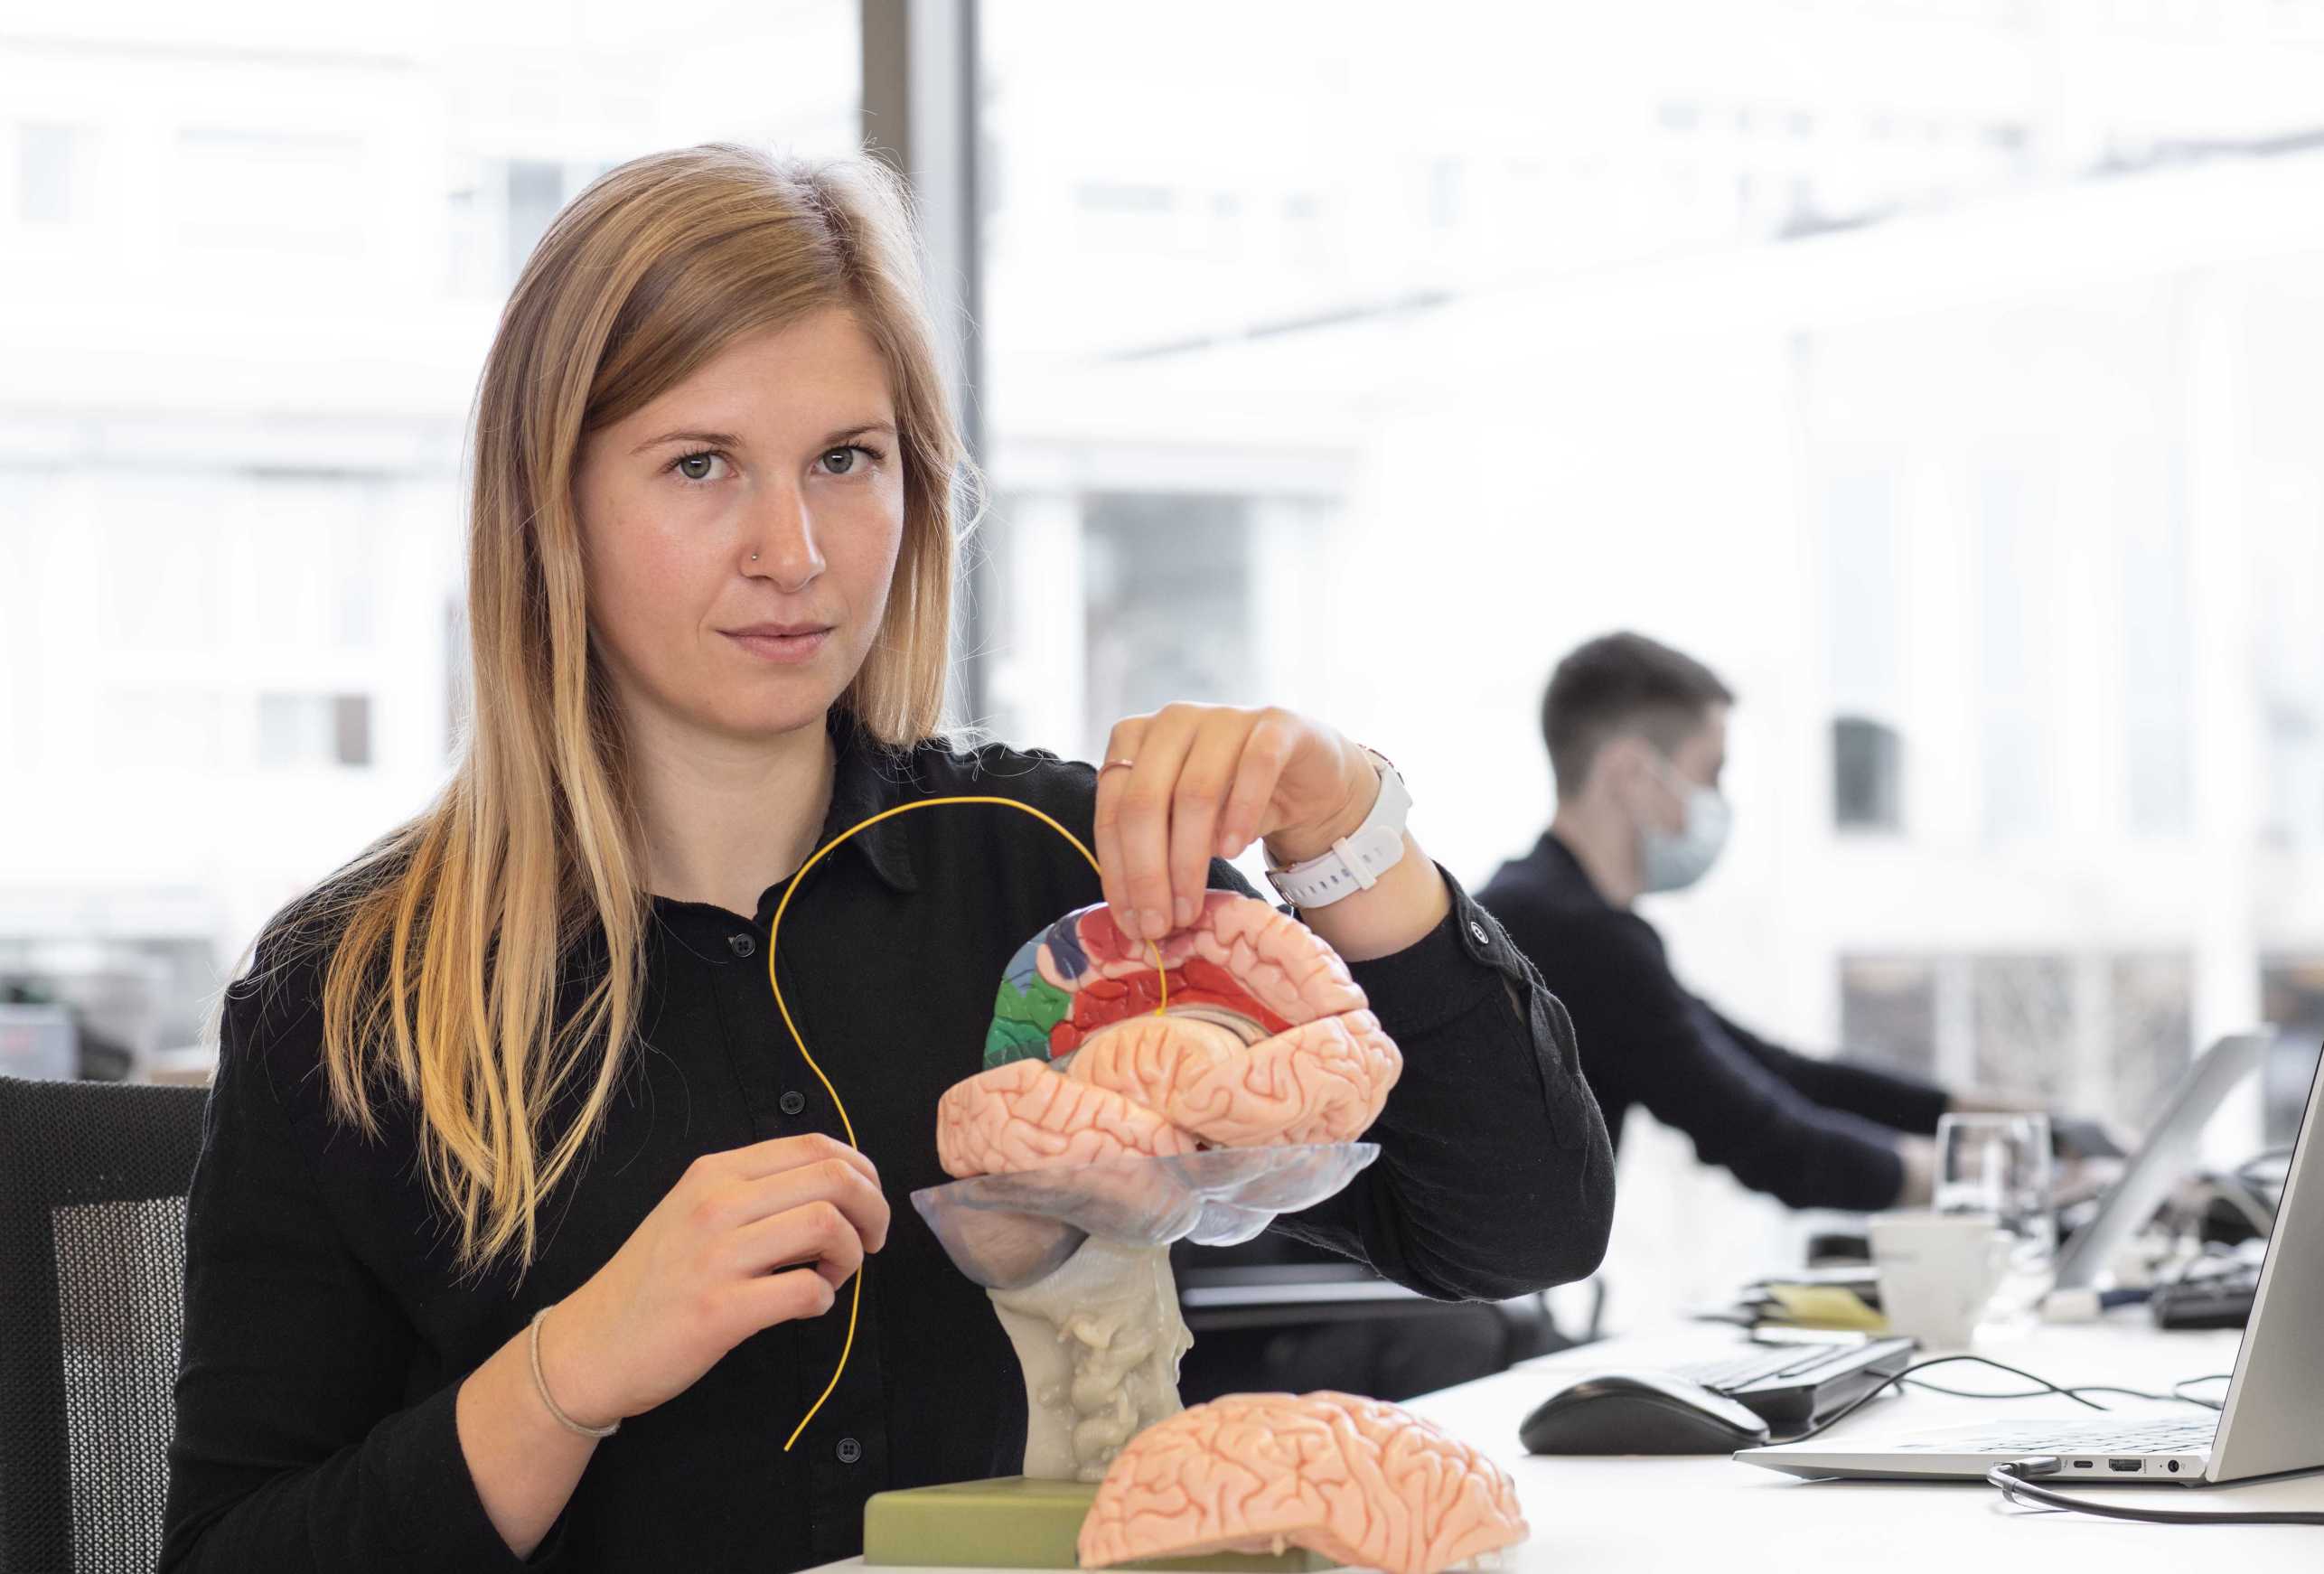 Enlarged view: Lena with brain model